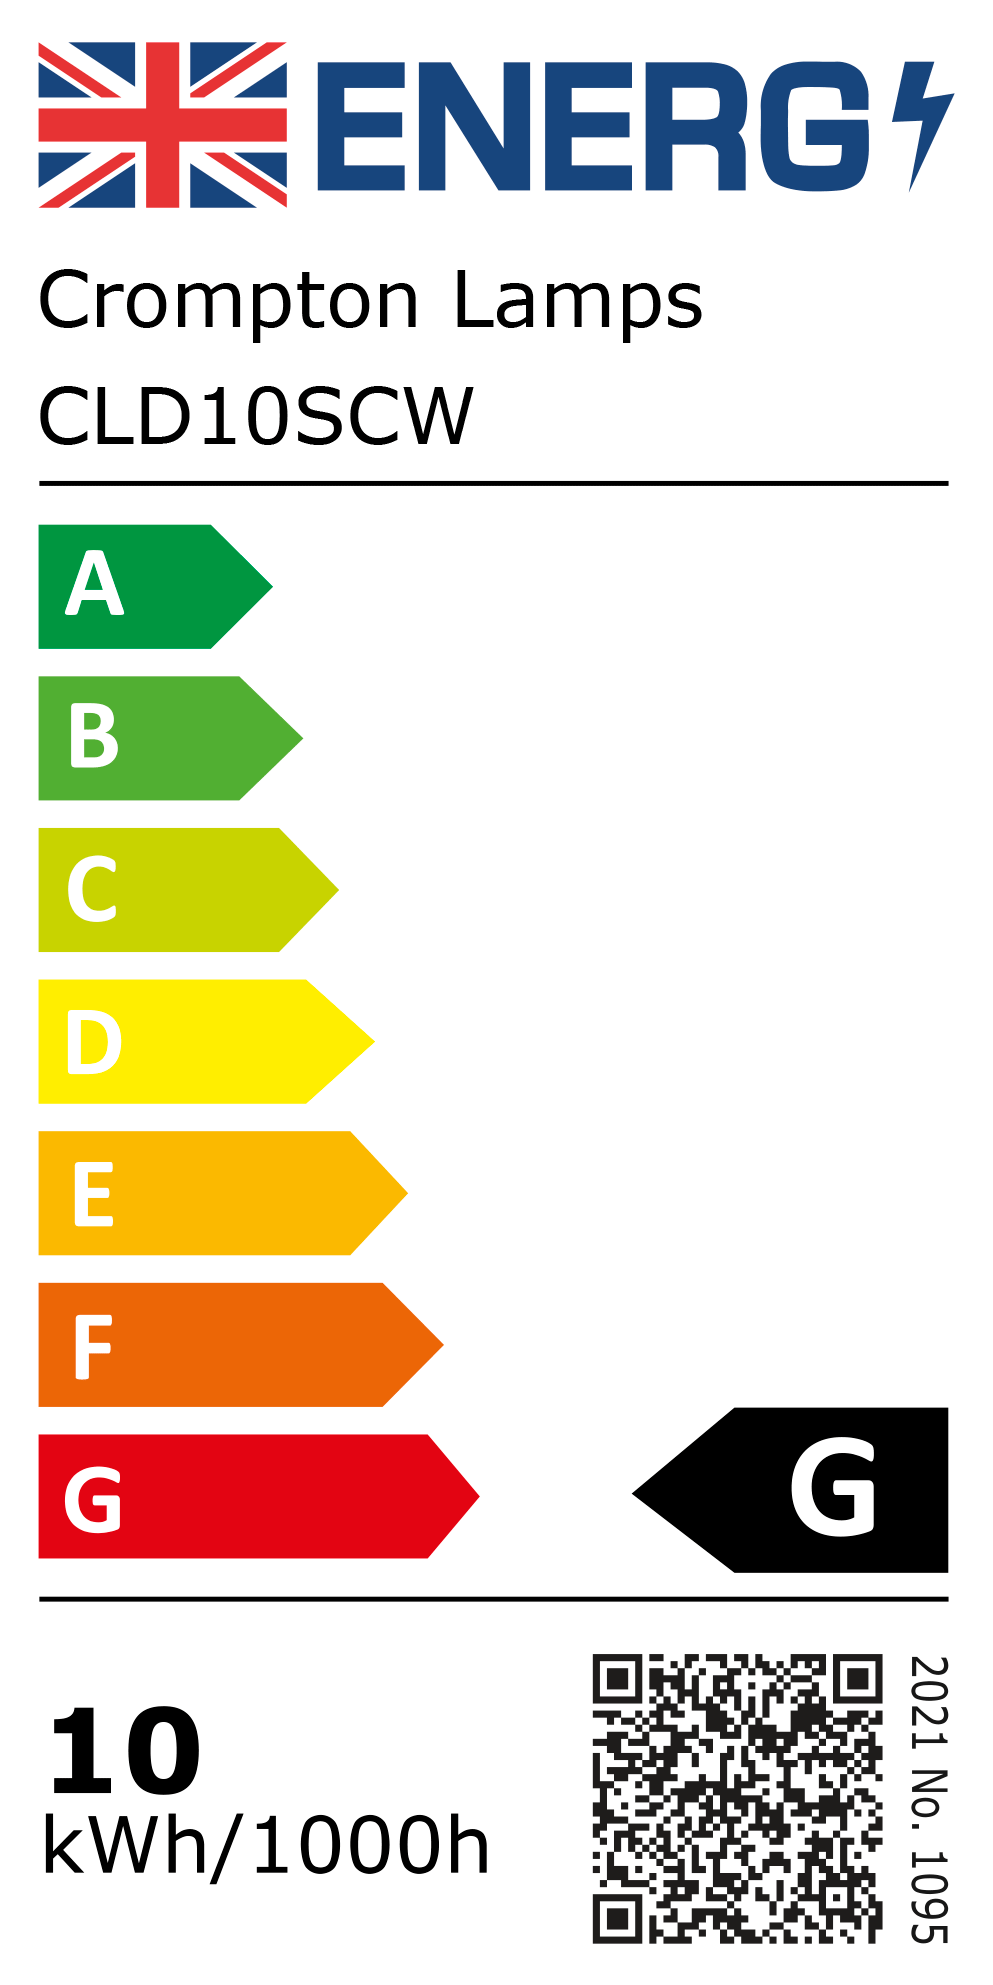 New 2021 Energy Rating Label: Stock Code CLD10SCW